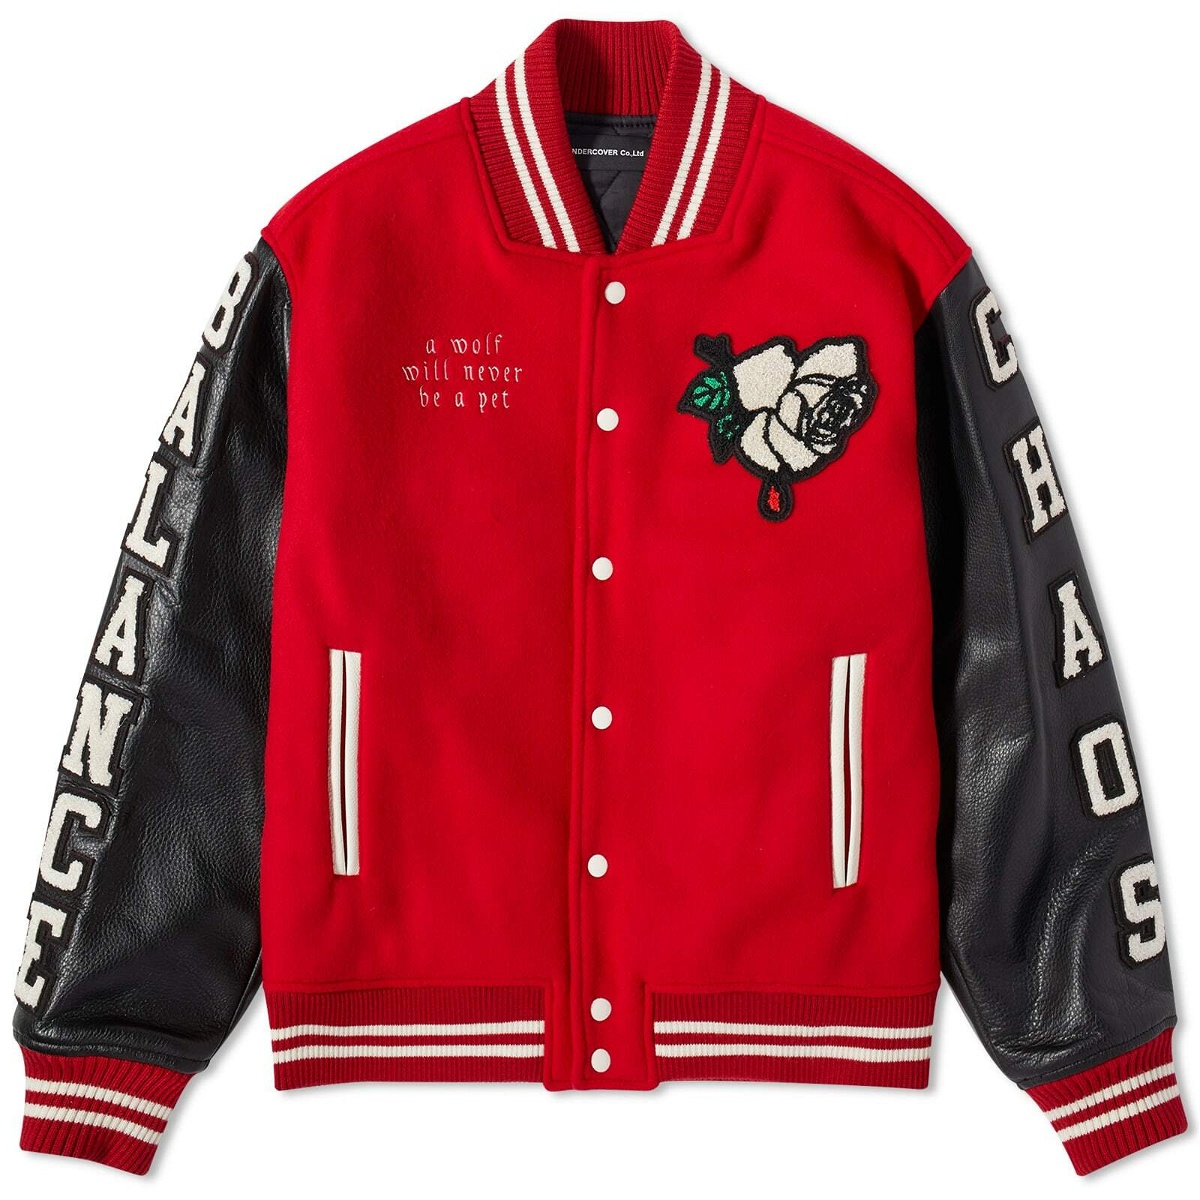 Undercover Men's Chaos Balance Varsity Jacket in Red Undercover